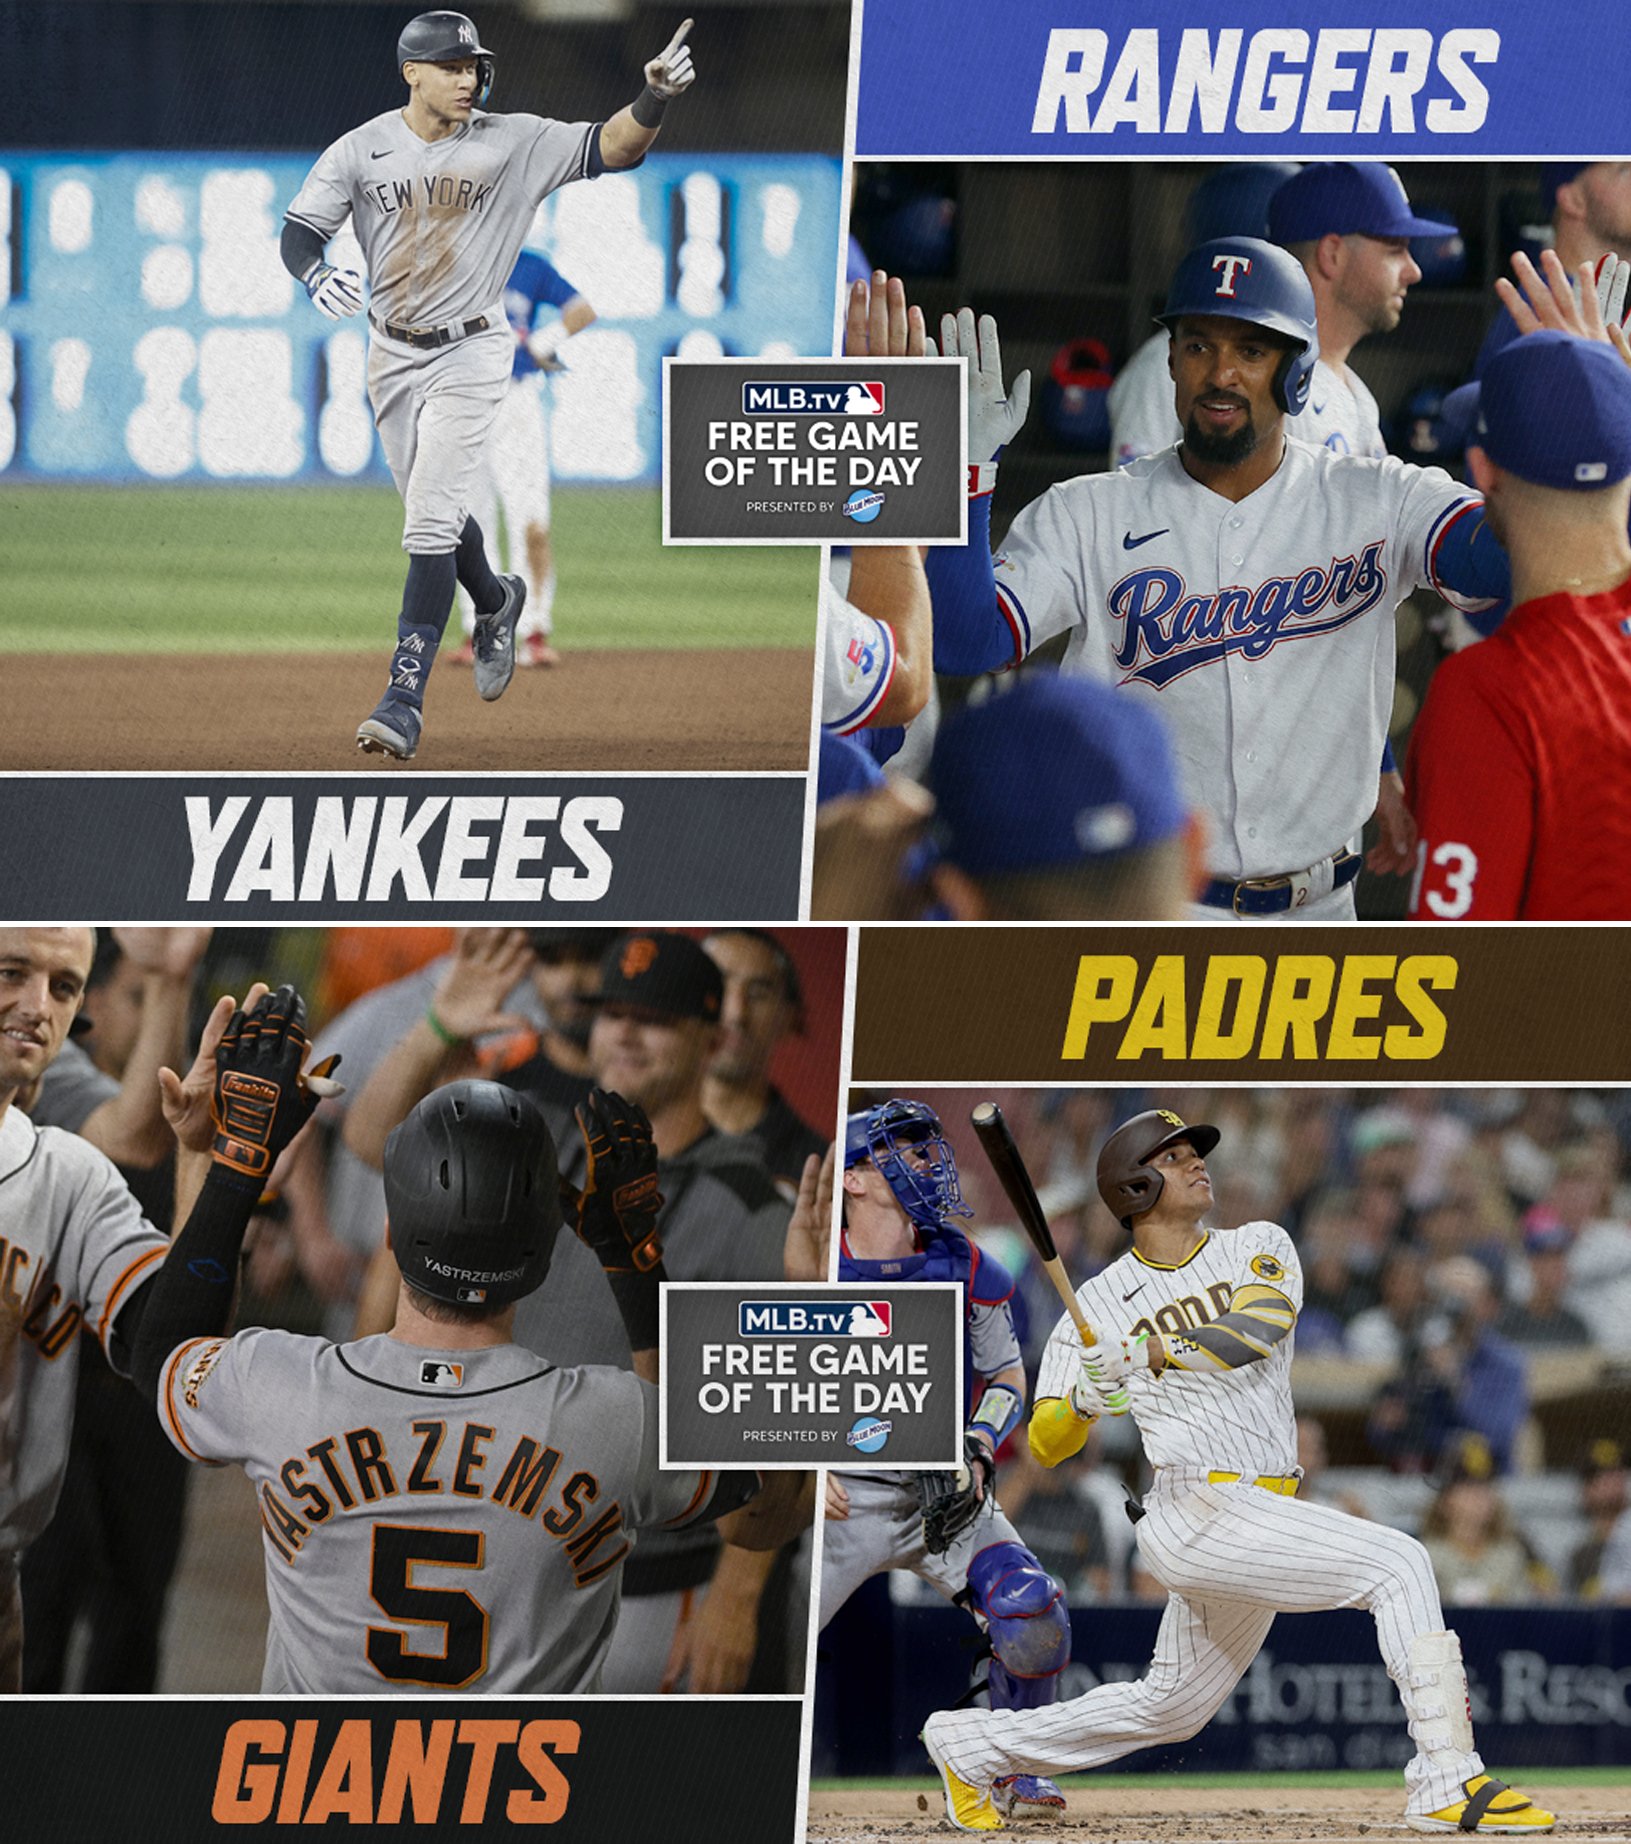 mlb tv free game of the day